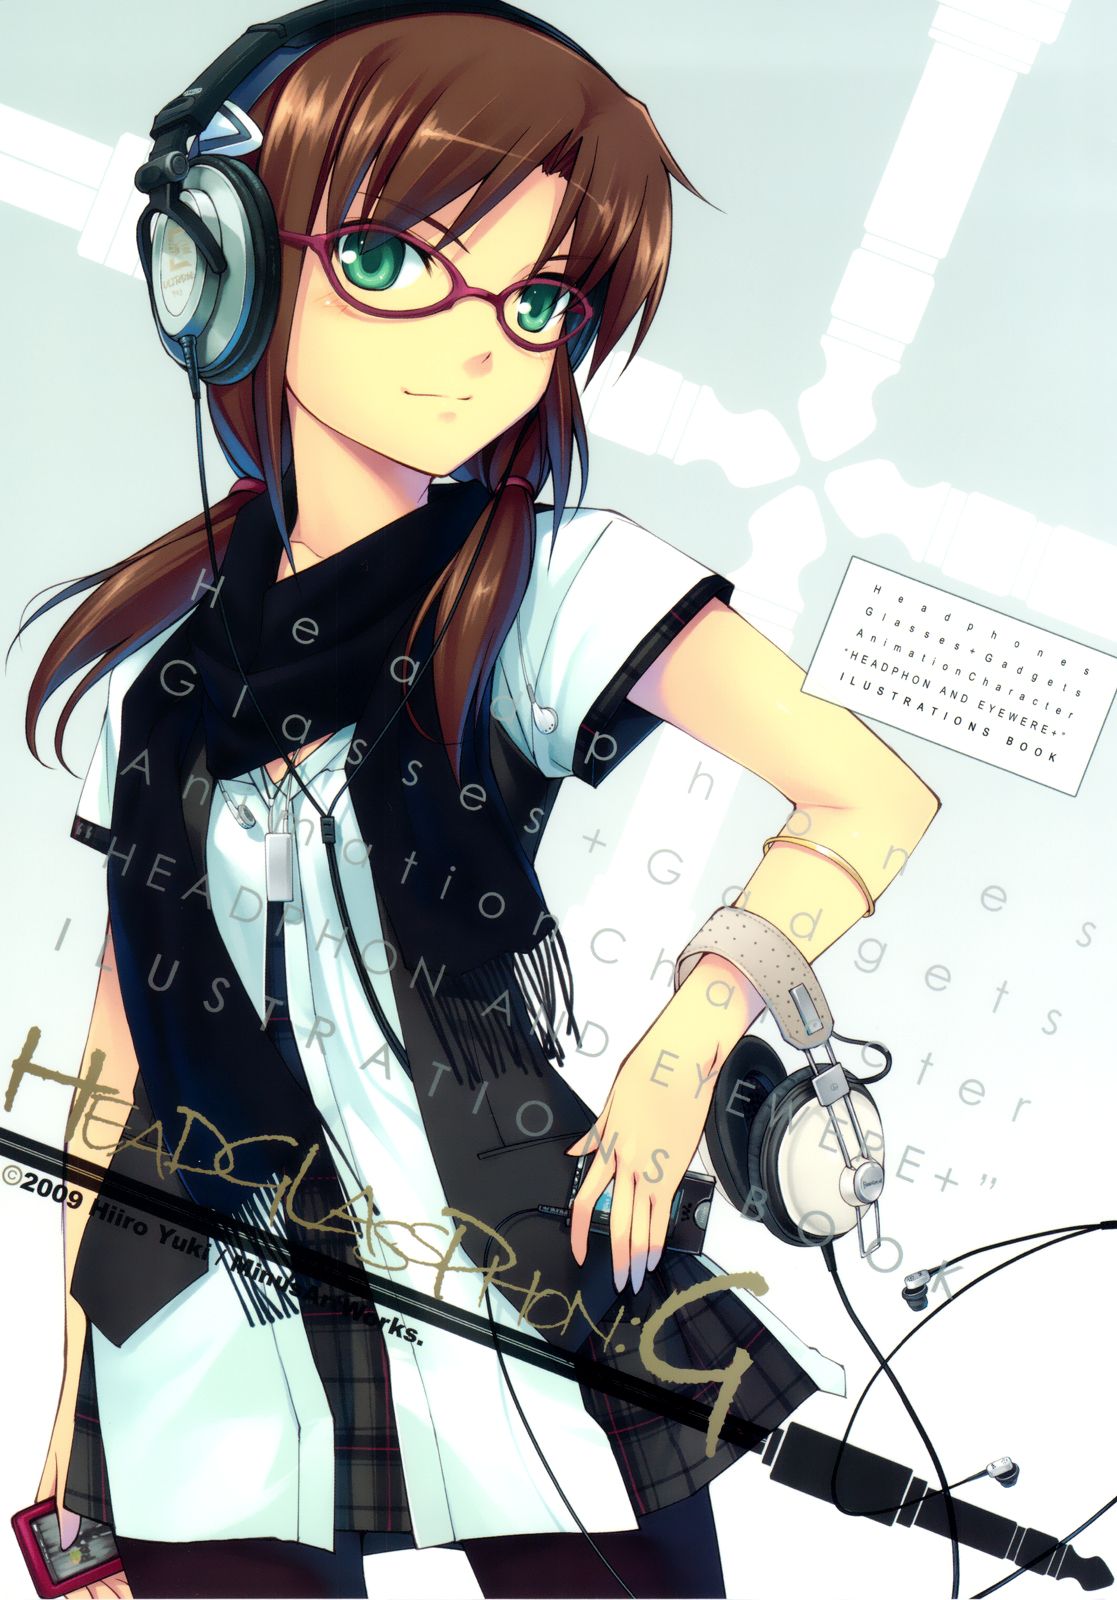 Drew trap picture or headphone girl えろあ. Vol.6 11